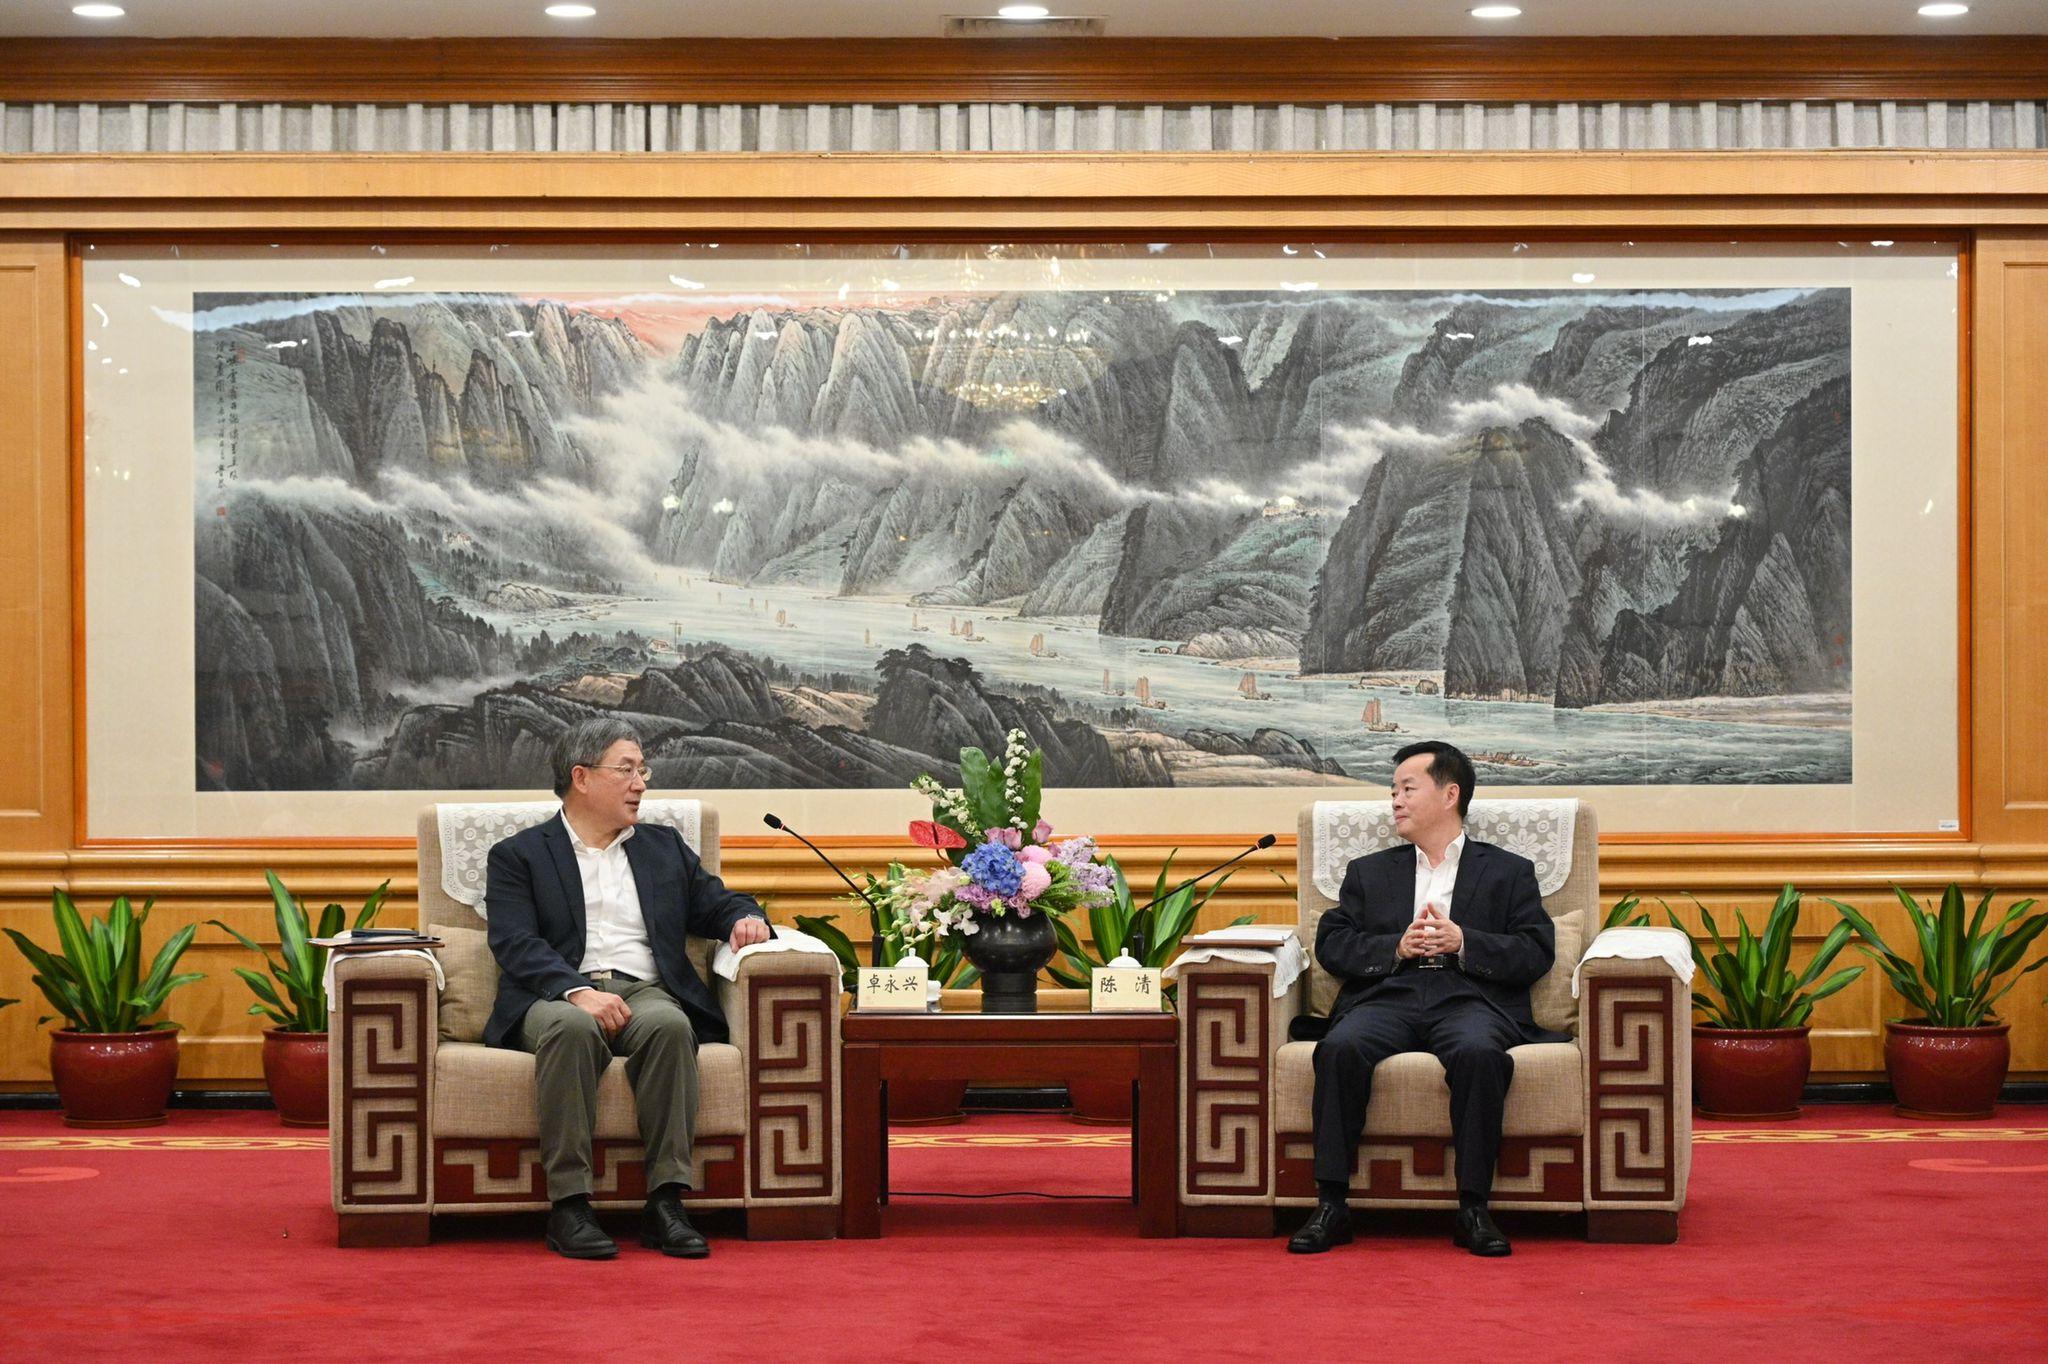 The Deputy Chief Secretary for Administration, Mr Cheuk Wing-hing (left), meets with Vice Mayor of Shenzhen Municipal Government Mr Chen Qing (right) in Shenzhen today (March 23).